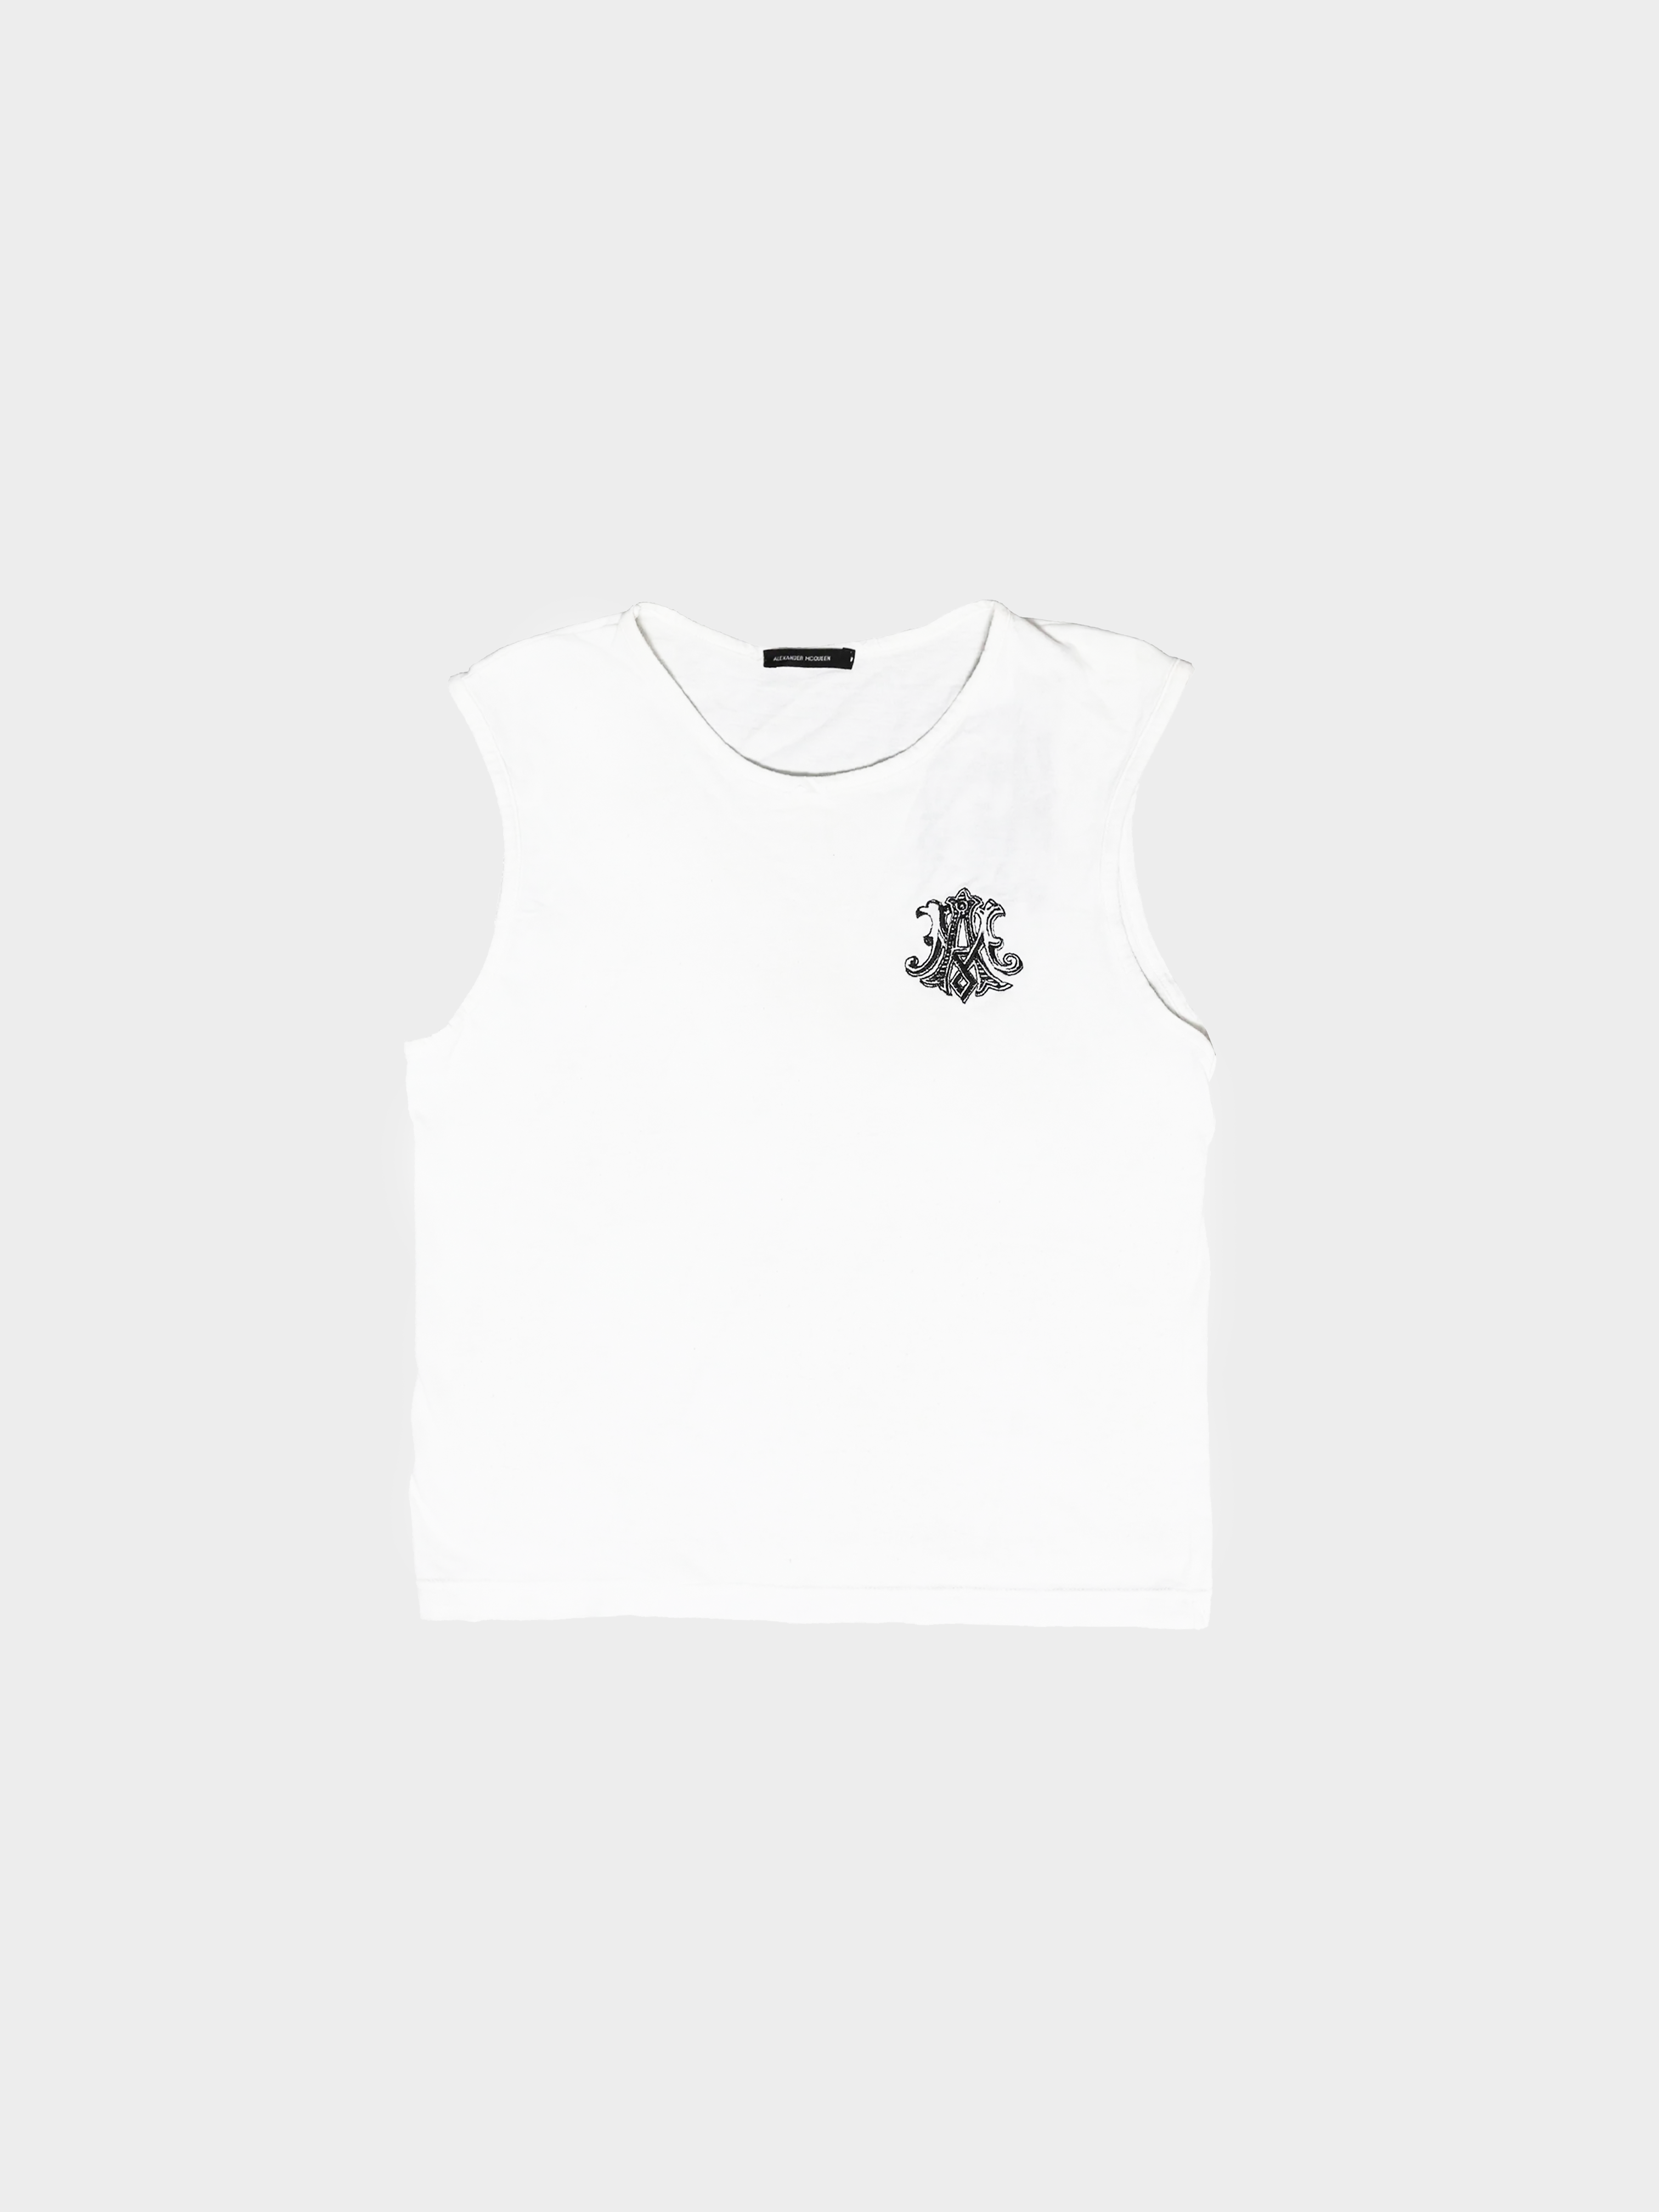 Alexander McQueen 1996 Embroidered White Tank Top